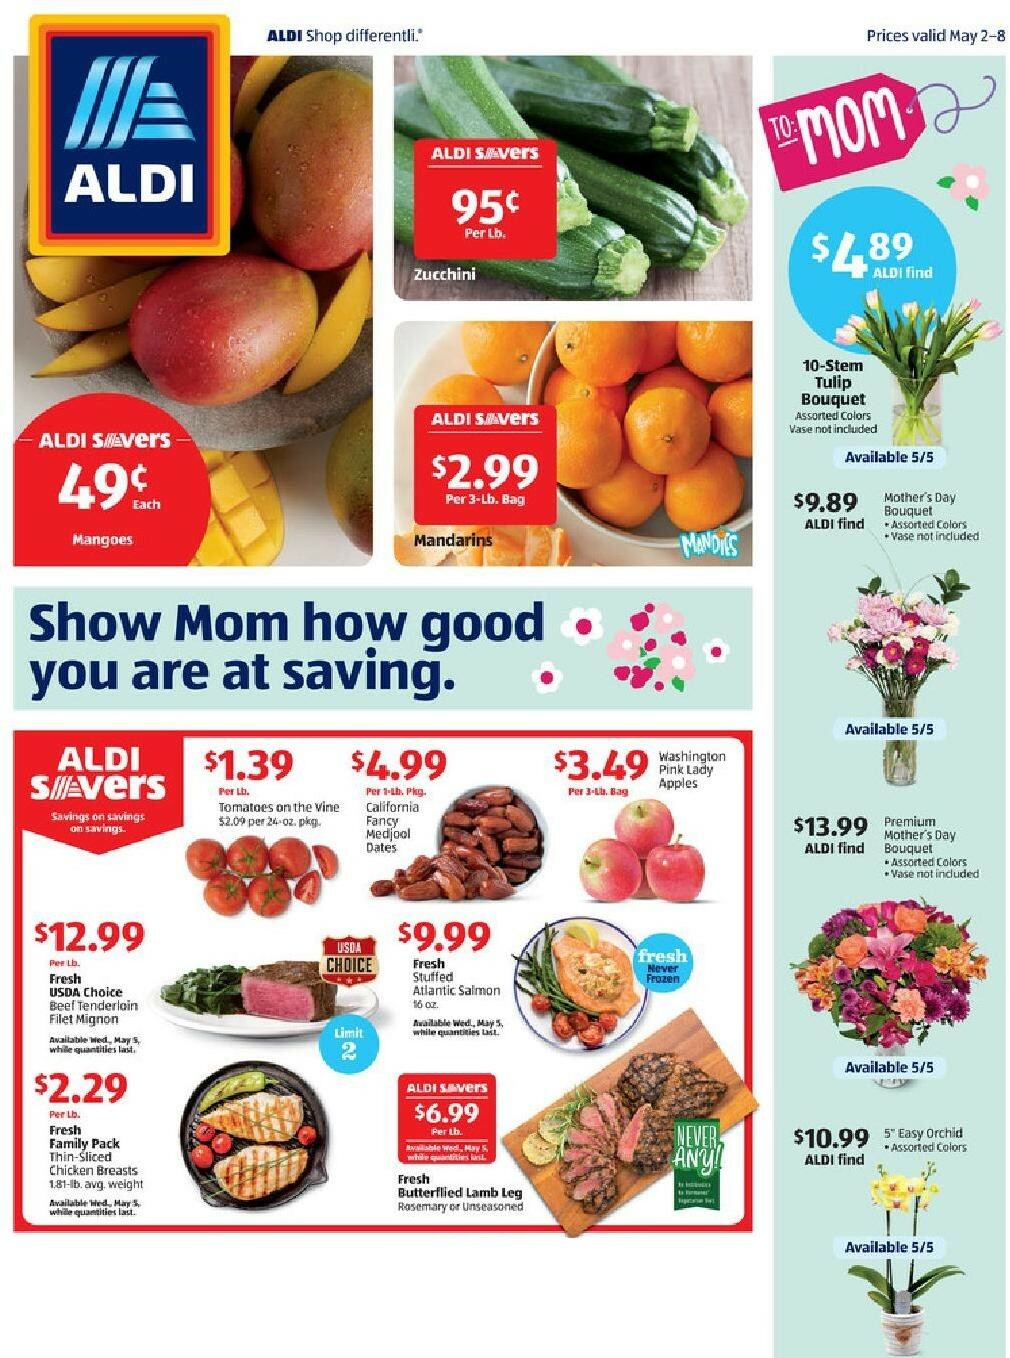 ALDI US Weekly Ads & Special Buys from May 2